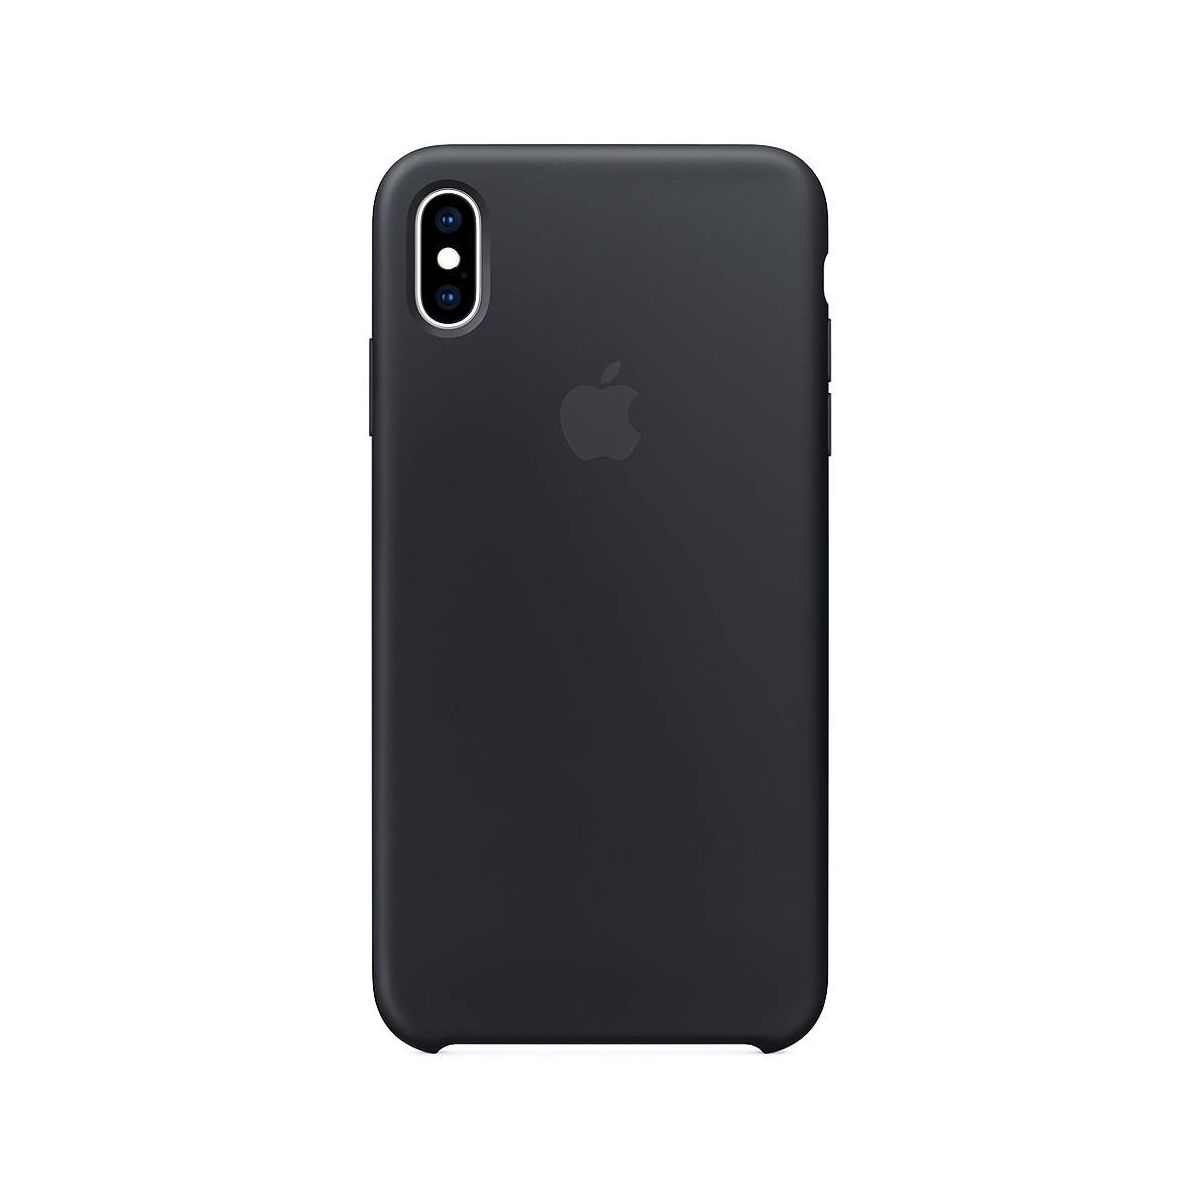 Apple Silicone Backcover for iPhone Xs Max - Black